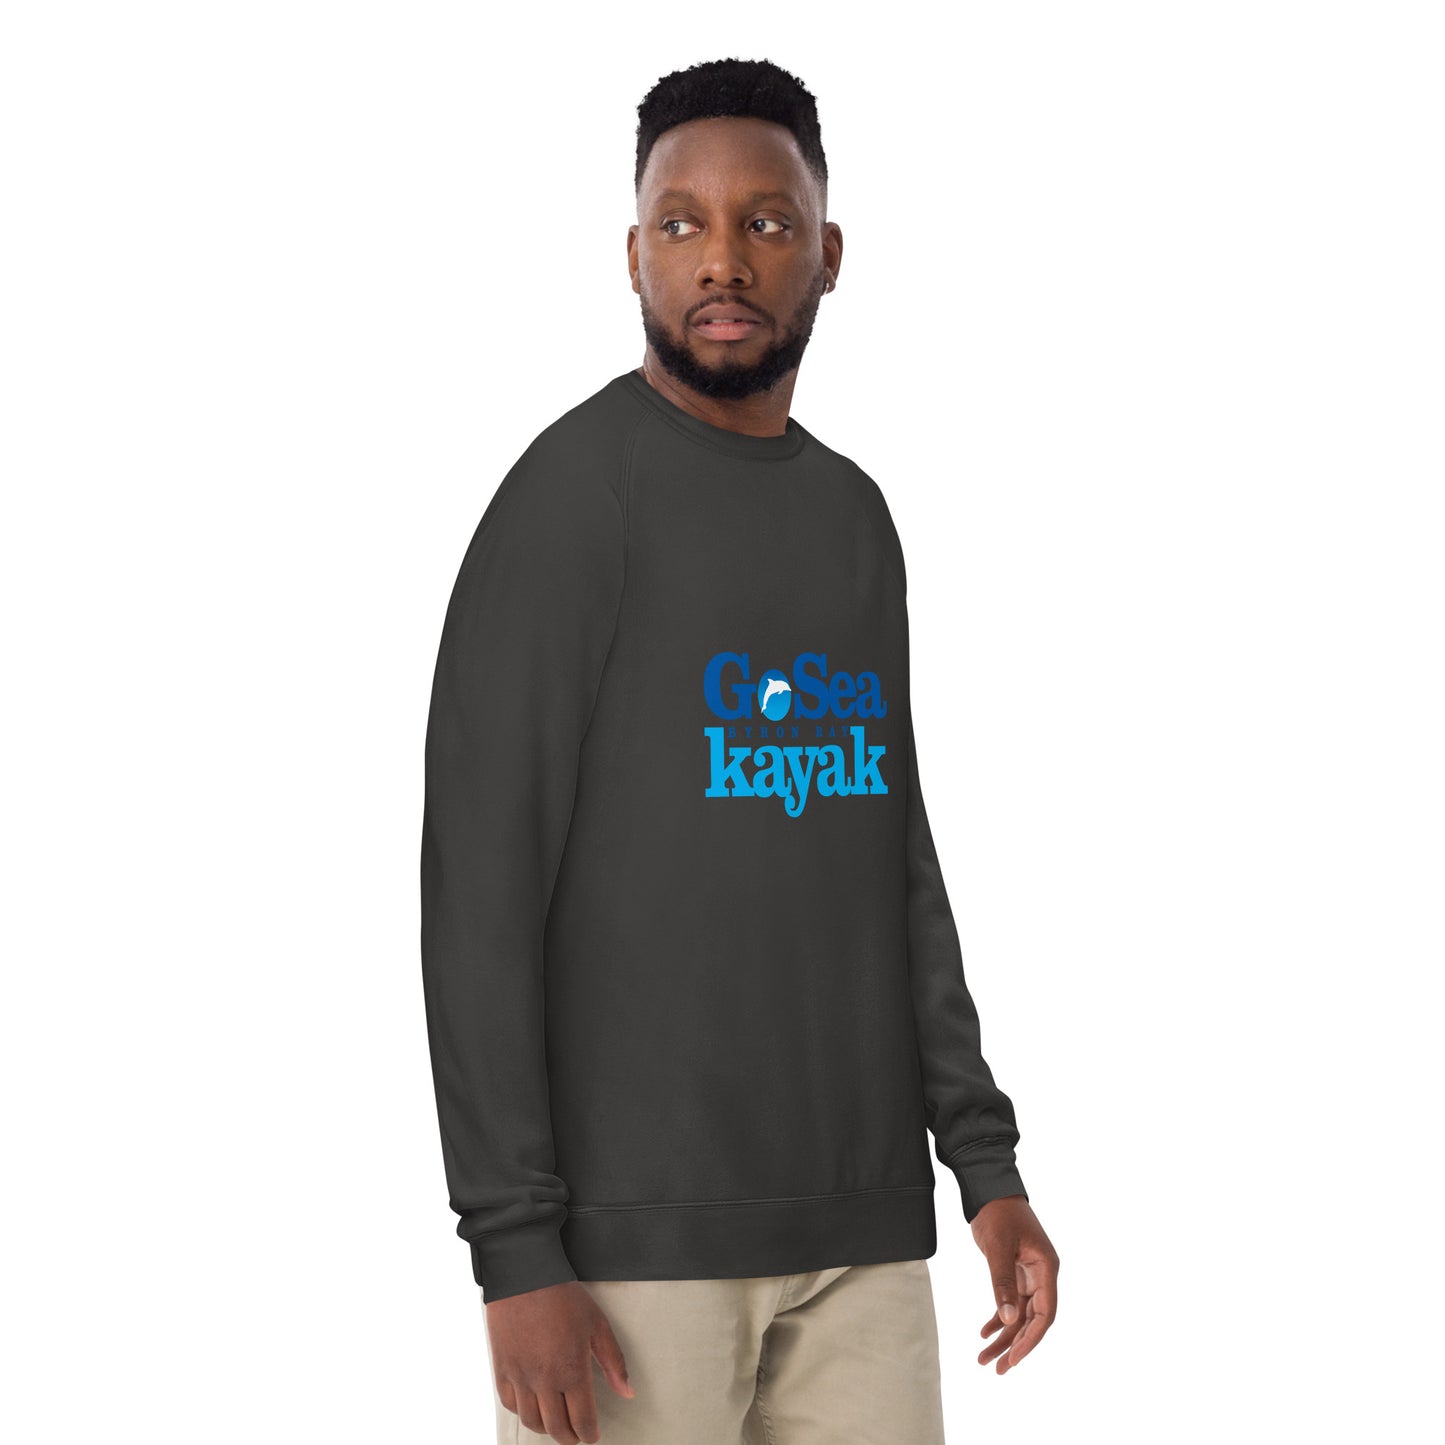  Unisex Sweatshirt - Coal - side view being warn by man with arms by side - Go Sea Kayak Byron Bay logo on front - Genuine Byron Bay Merchandise | Produced by Go Sea Kayak Byron Bay 